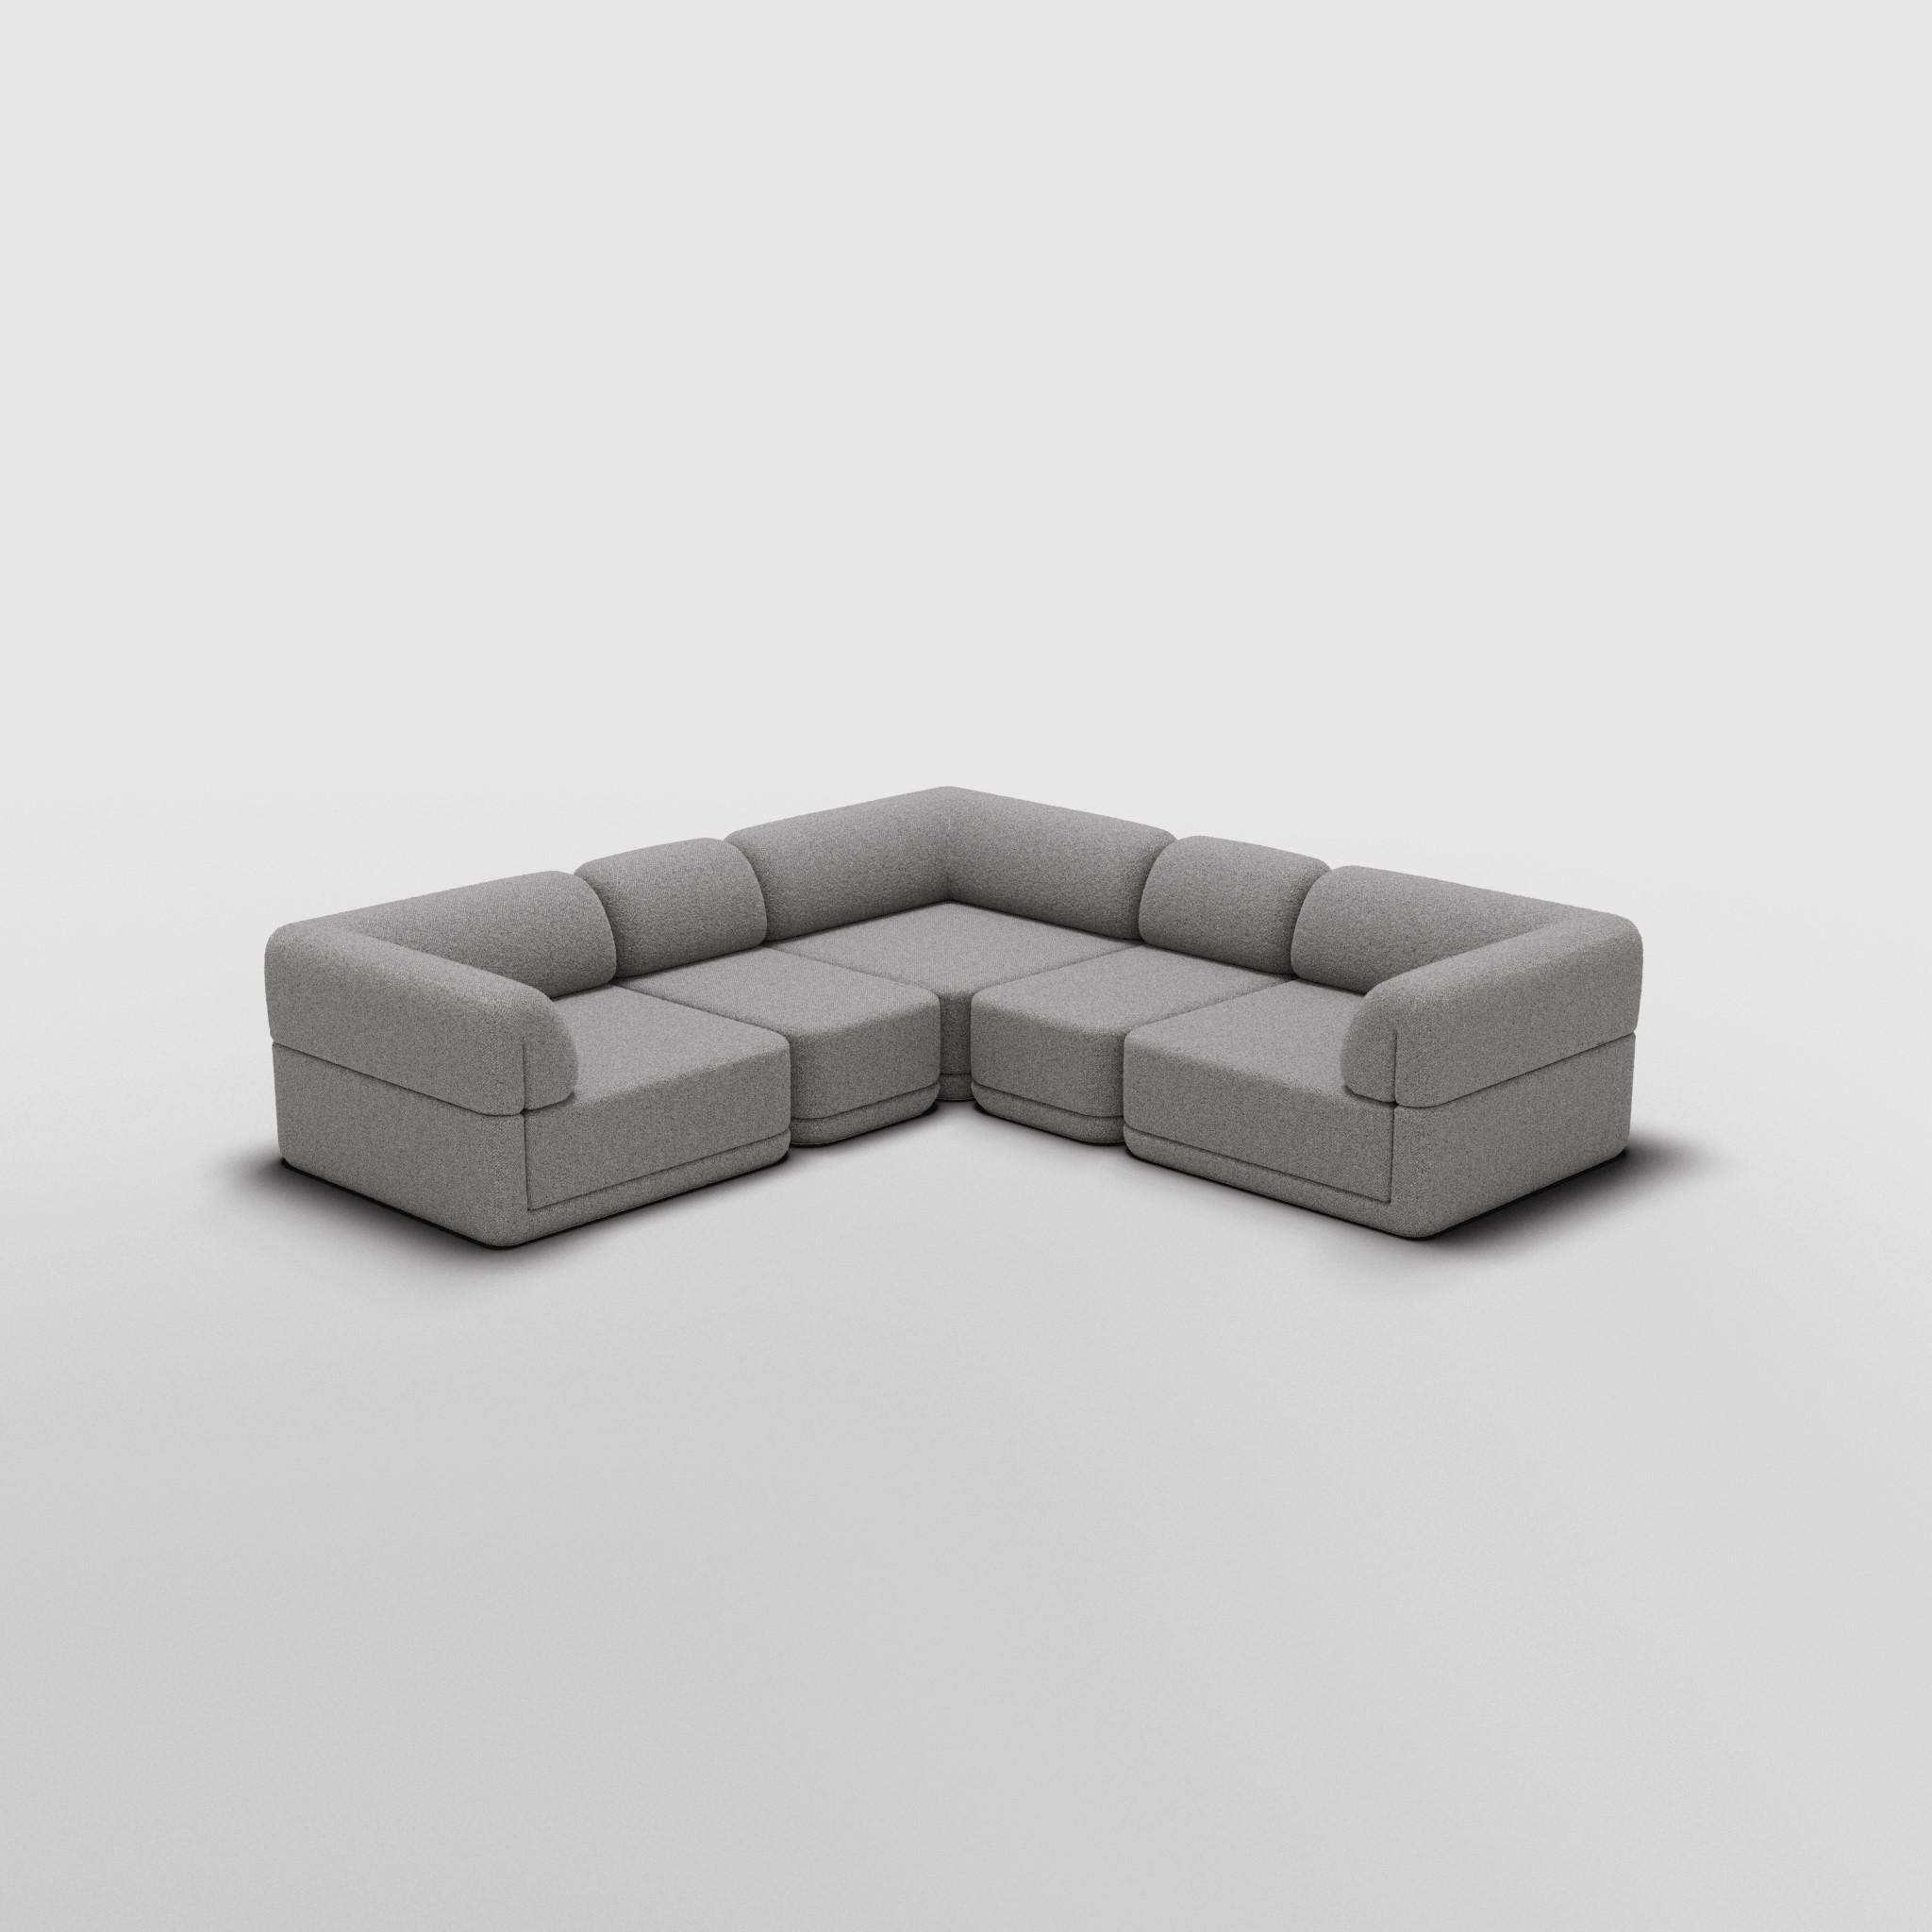 Contemporary The Cube Sofa - Corners & Slims For Sale